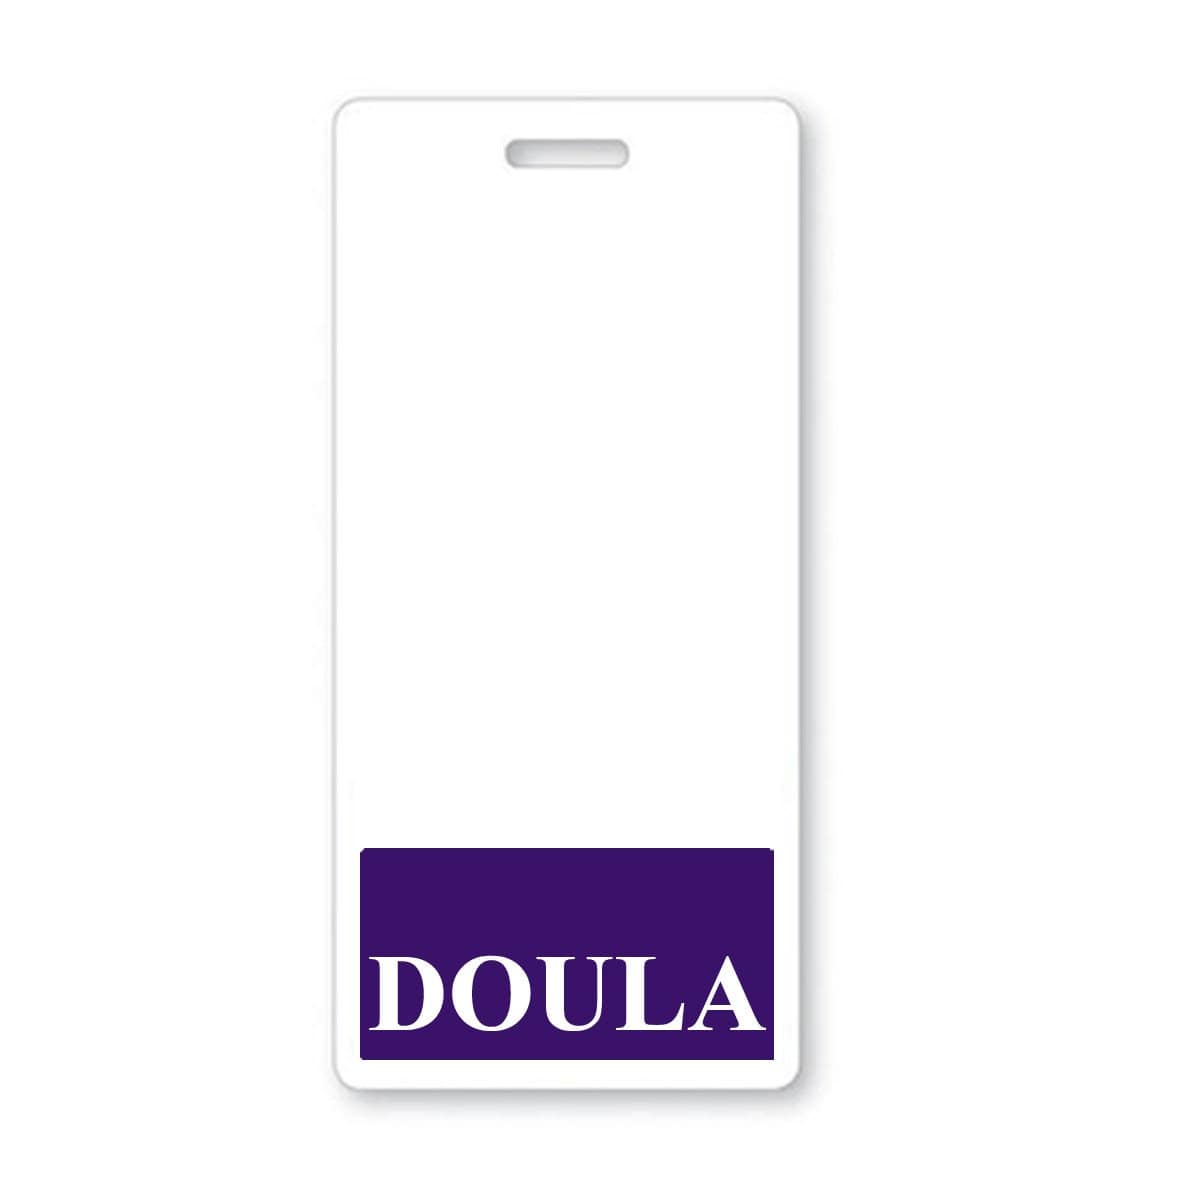 DOULA Vertical Badge Buddy with Purple Border BB-DOULA-PURPLE-V